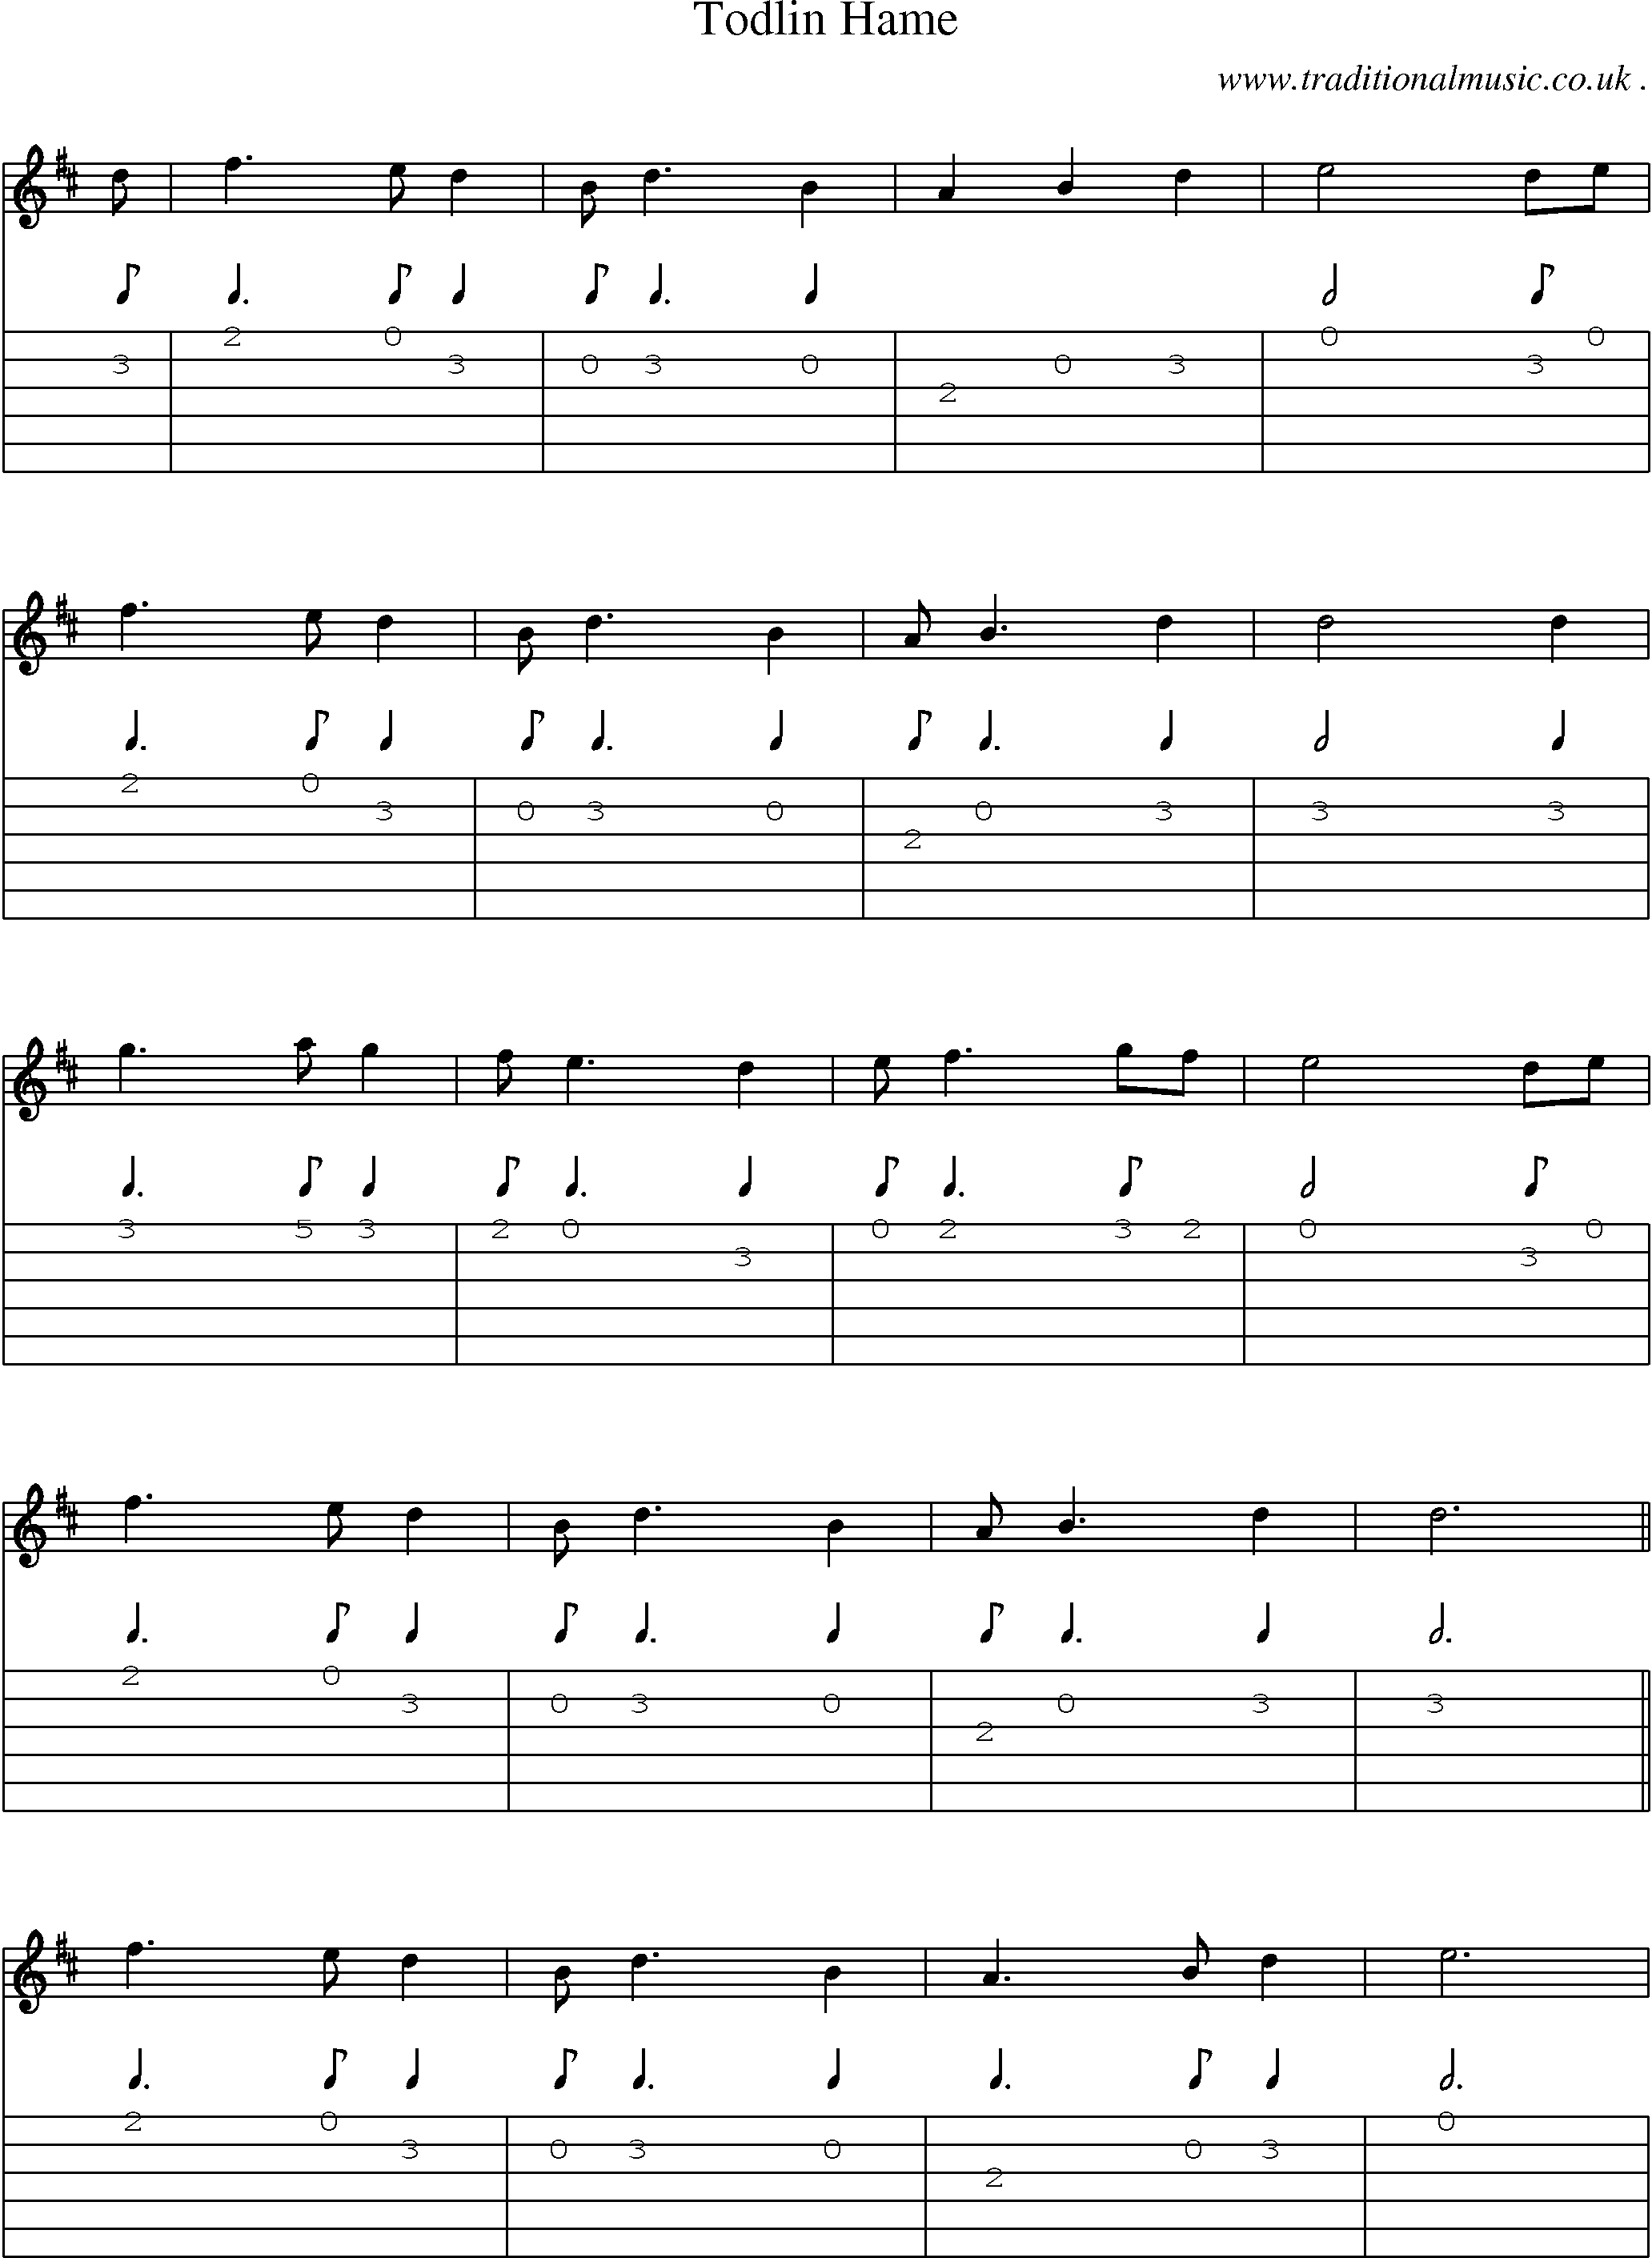 Sheet-music  score, Chords and Guitar Tabs for Todlin Hame